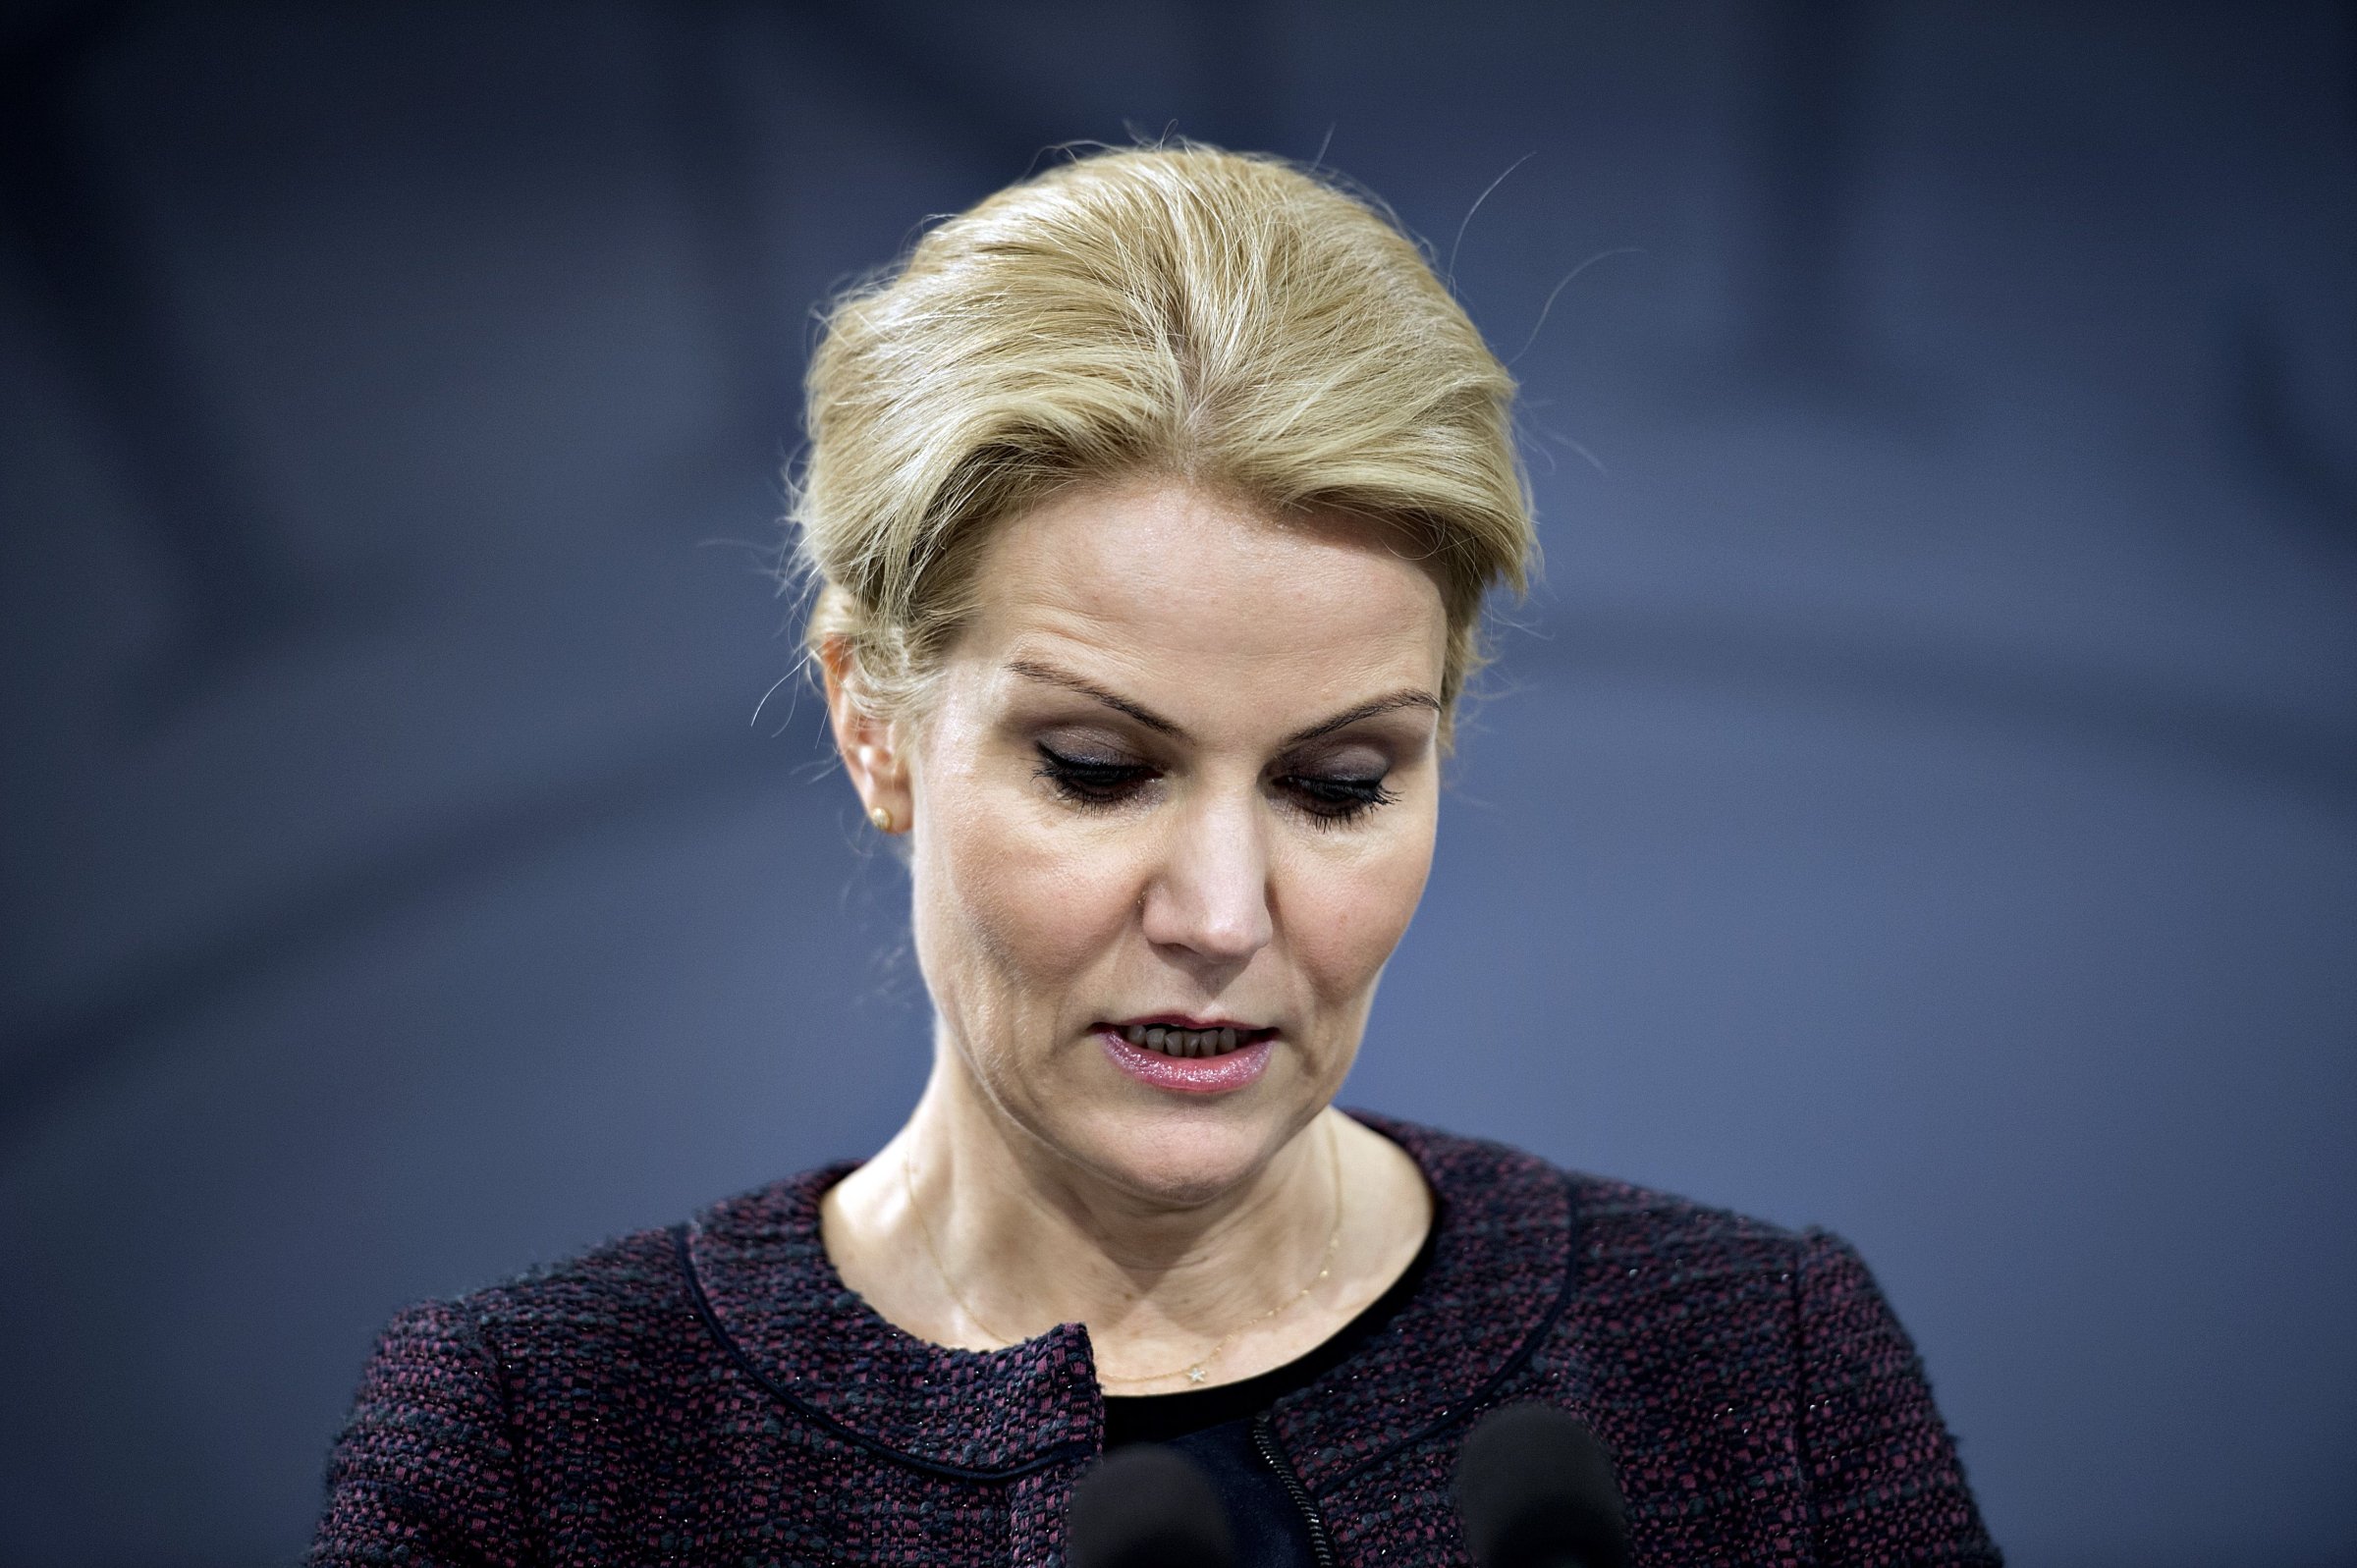 Danish Prime Minister Helle Thorning-Schmidt at a press conference on Jan. 30, 2014 at the Prime Minister's office in Copenhagen.